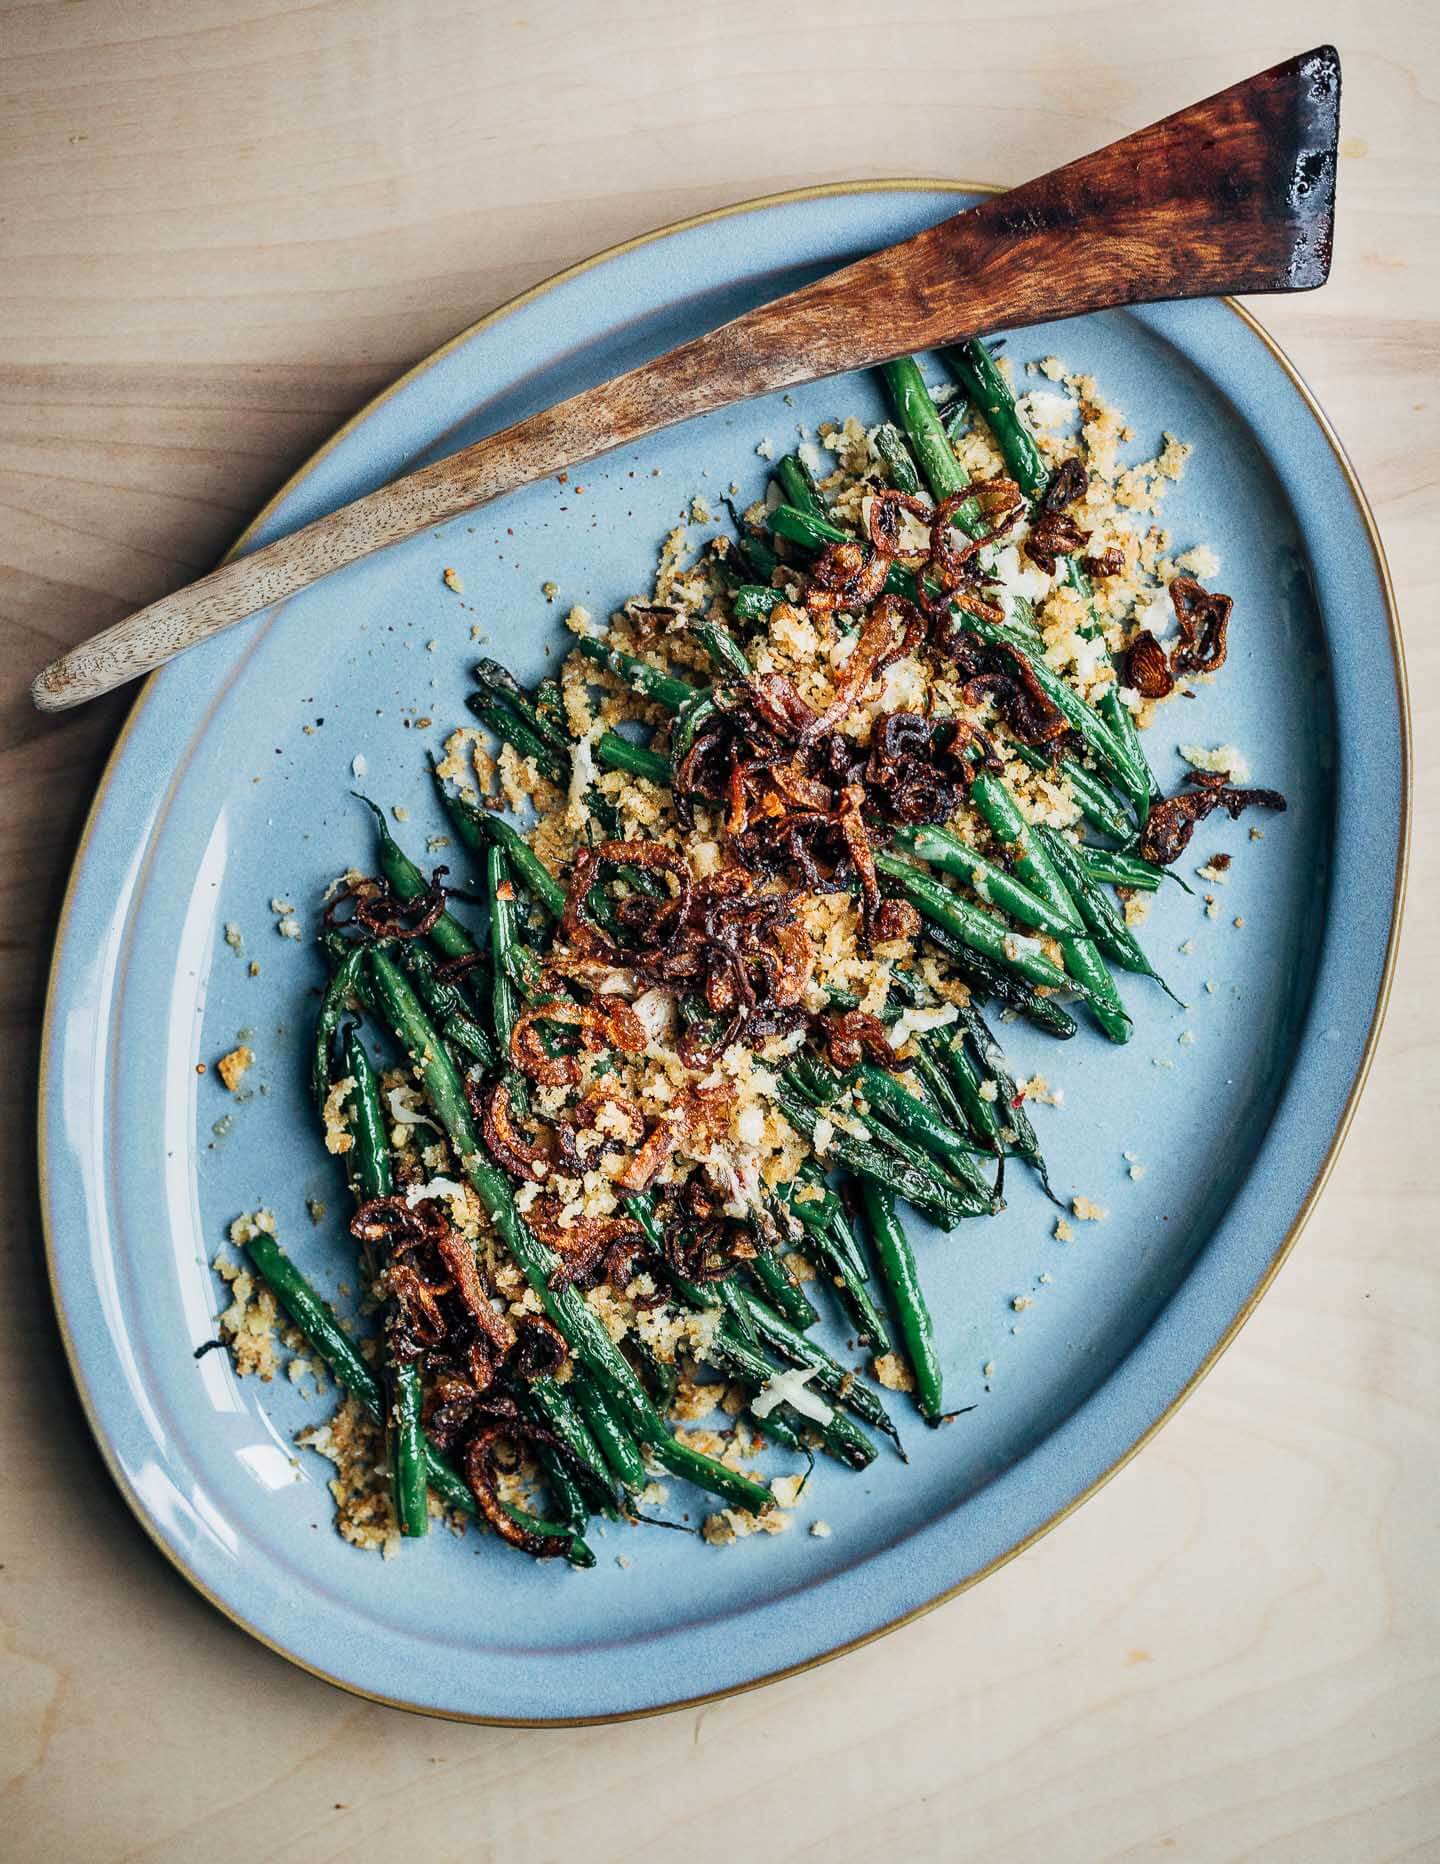 A platter of cooked green beans topped with golden breadcrumbs and fried shallots.